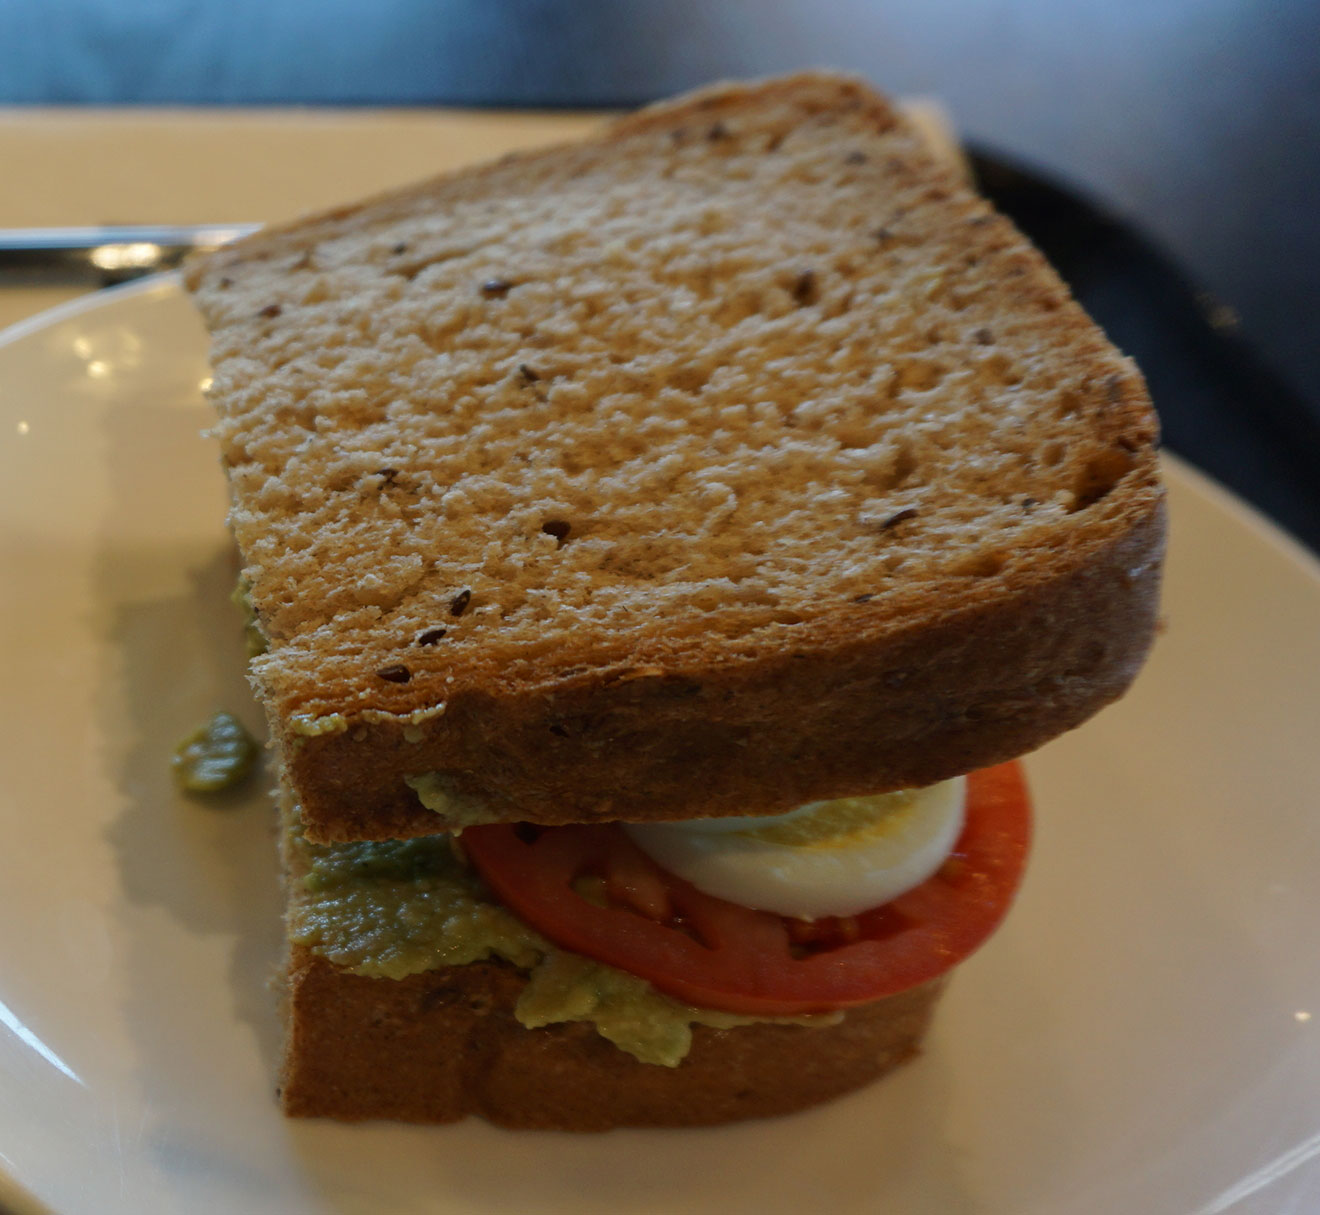 This is a picture of a sandwich.